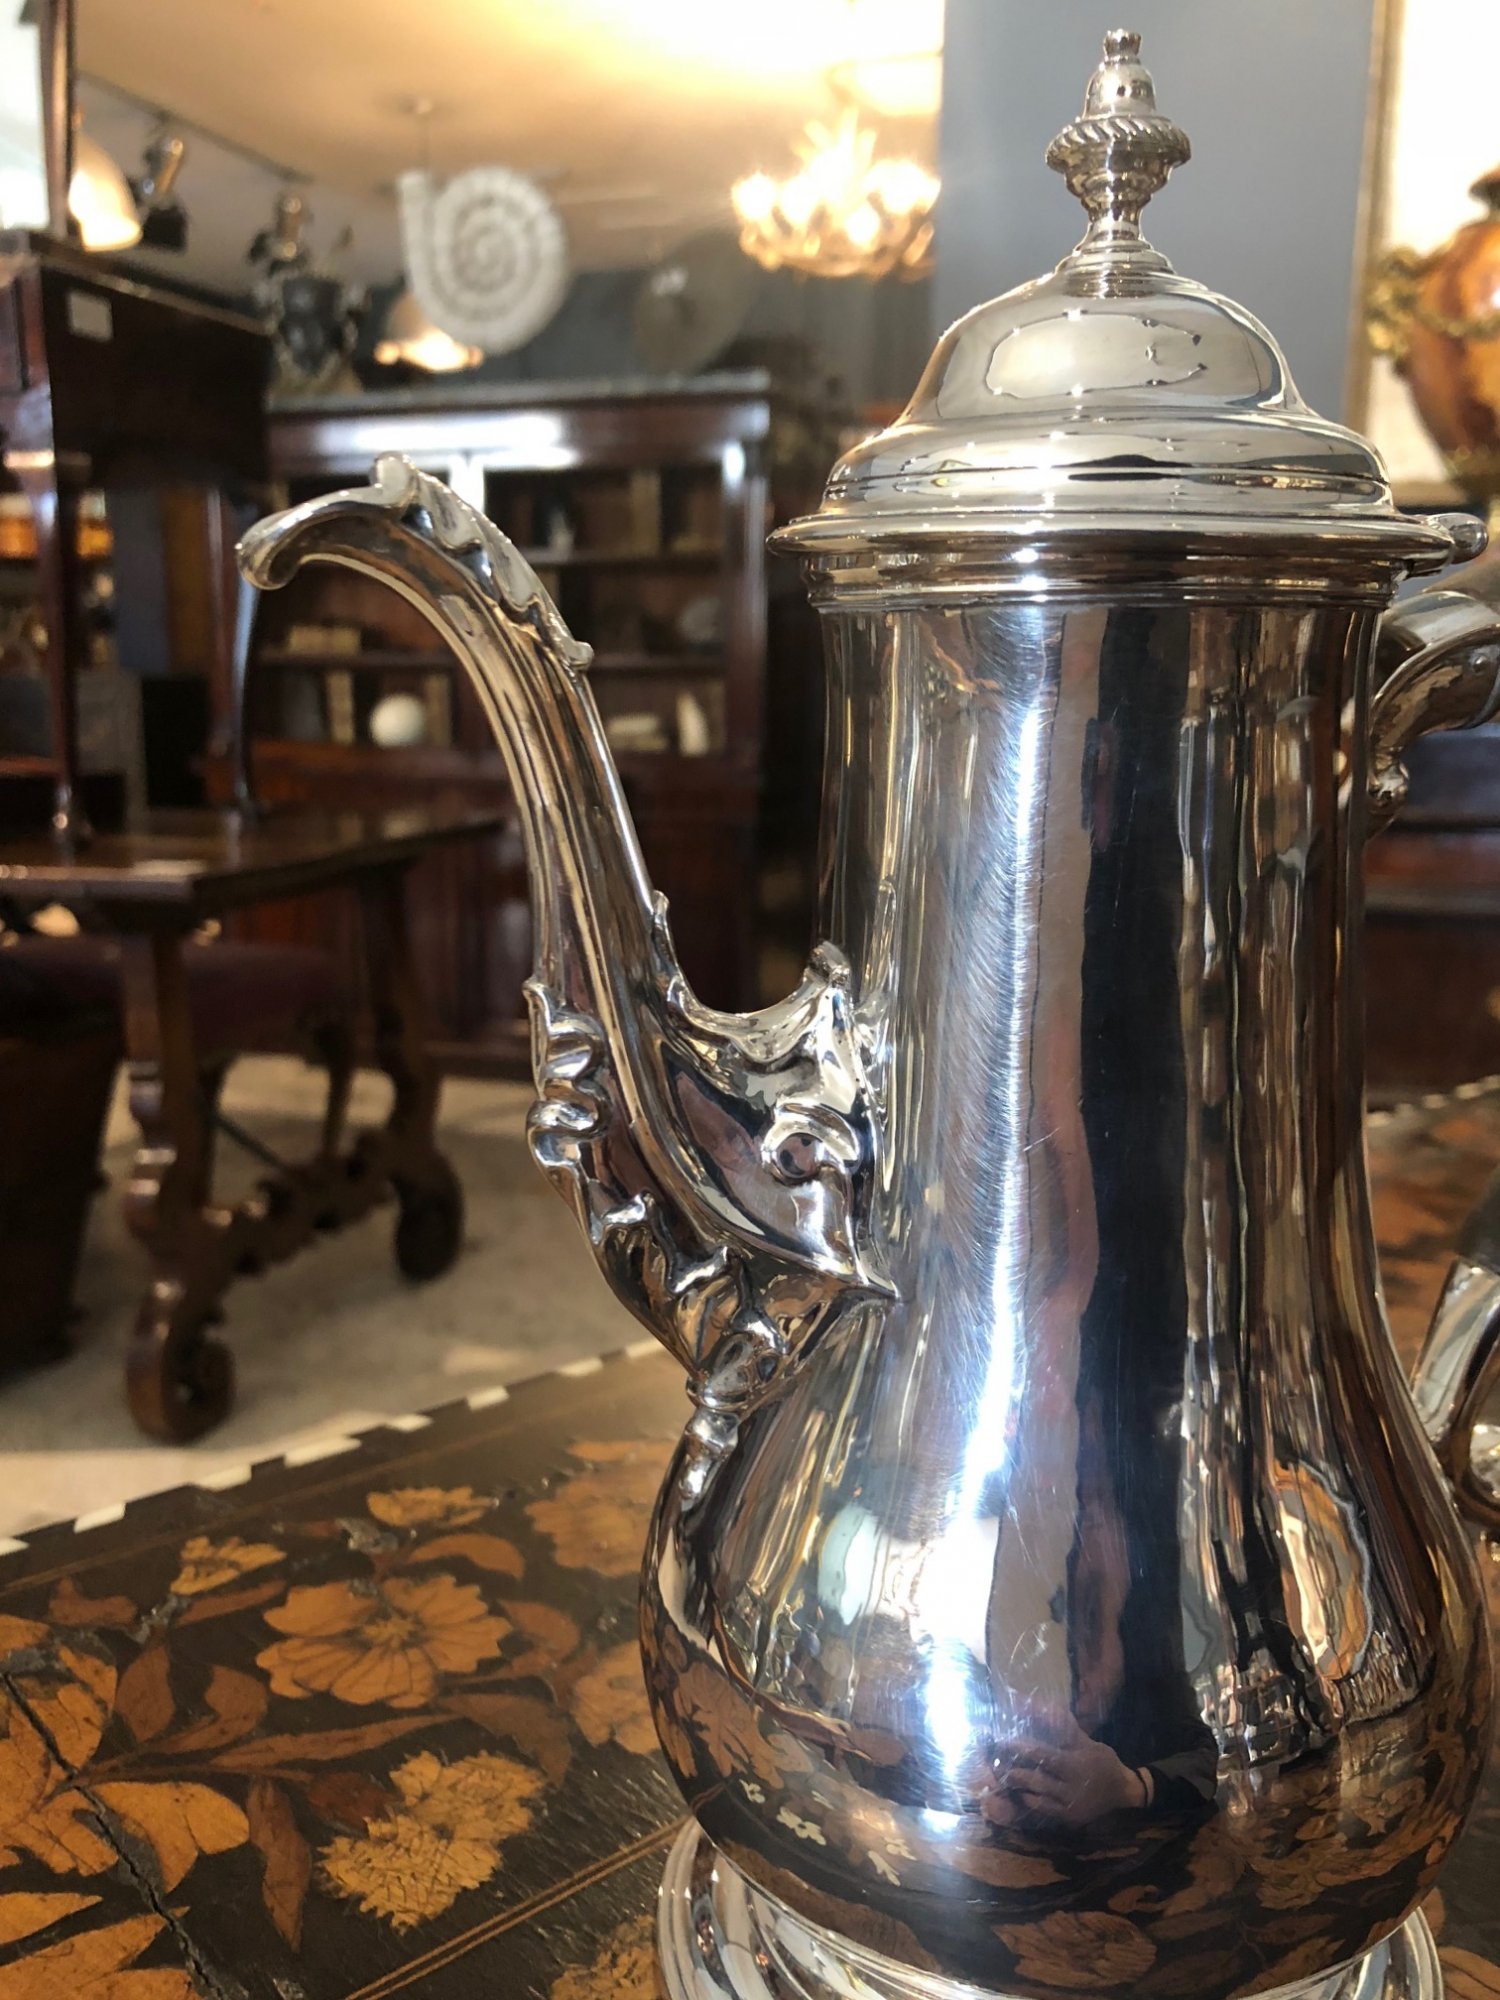 Mid 18th Century Sterling Silver Coffee Pot